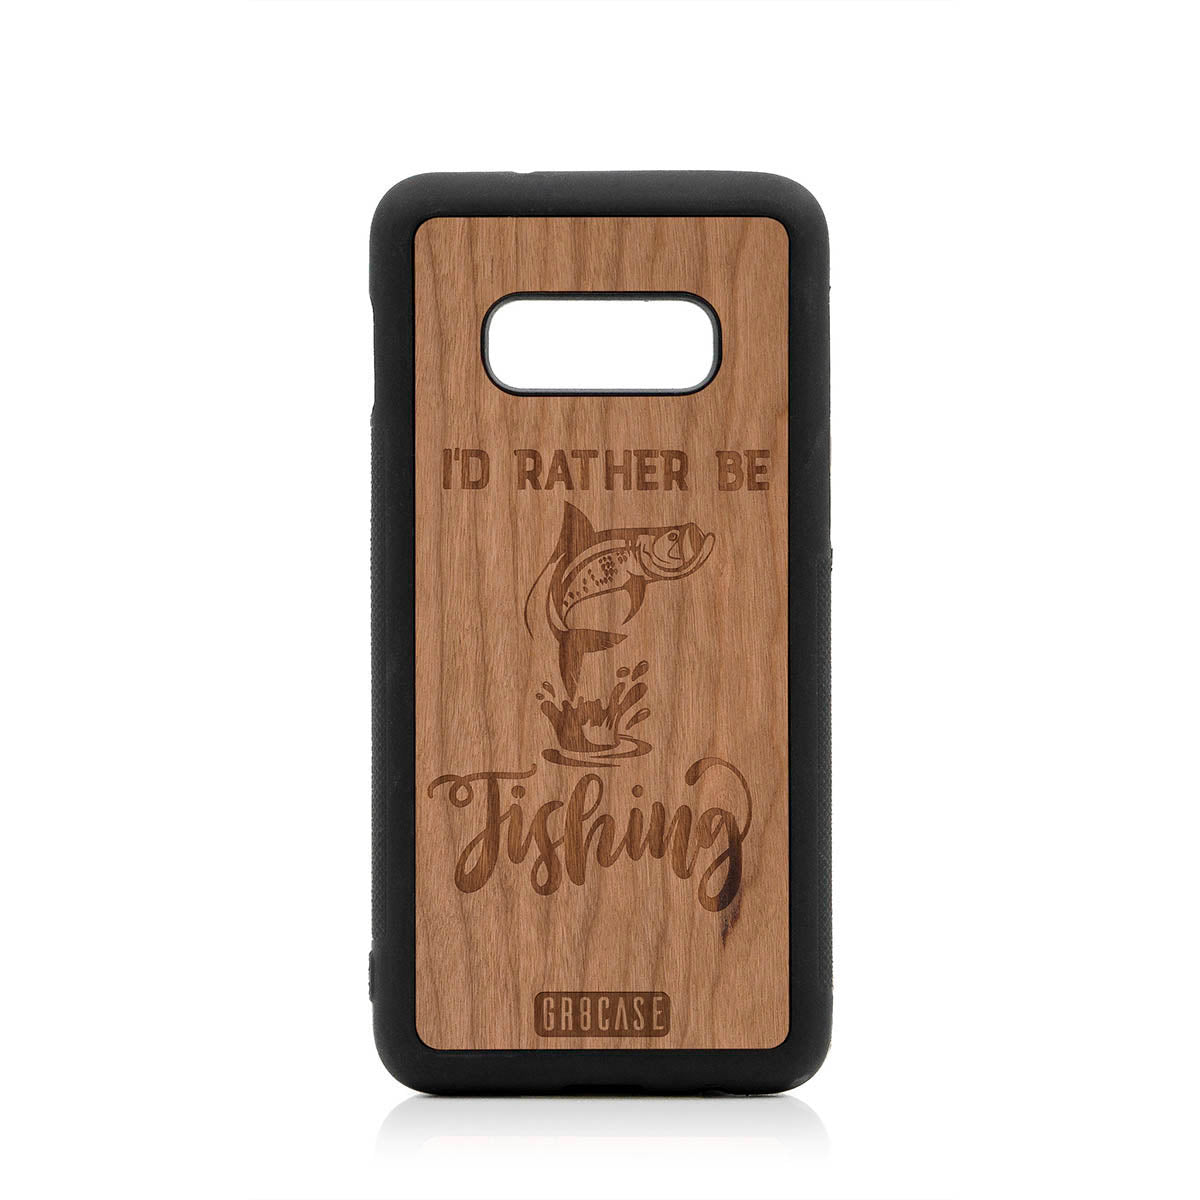 I'D Rather Be Fishing Design Wood Case For Samsung Galaxy S10E